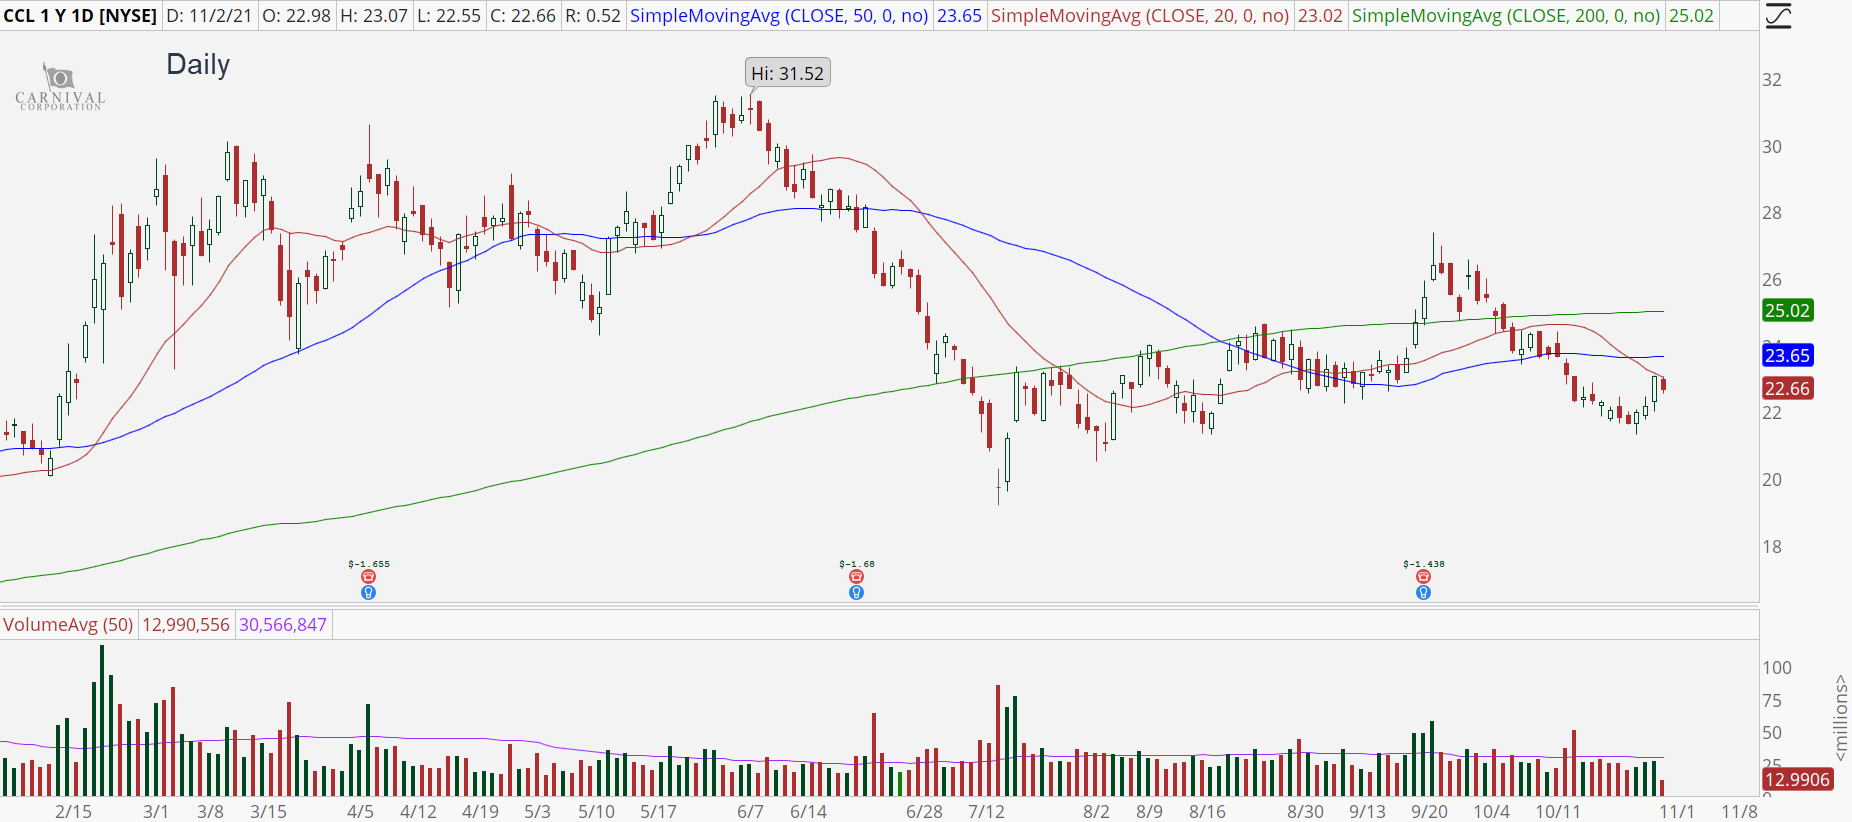 Carnival (CCL) stock daily chart with bear retracement